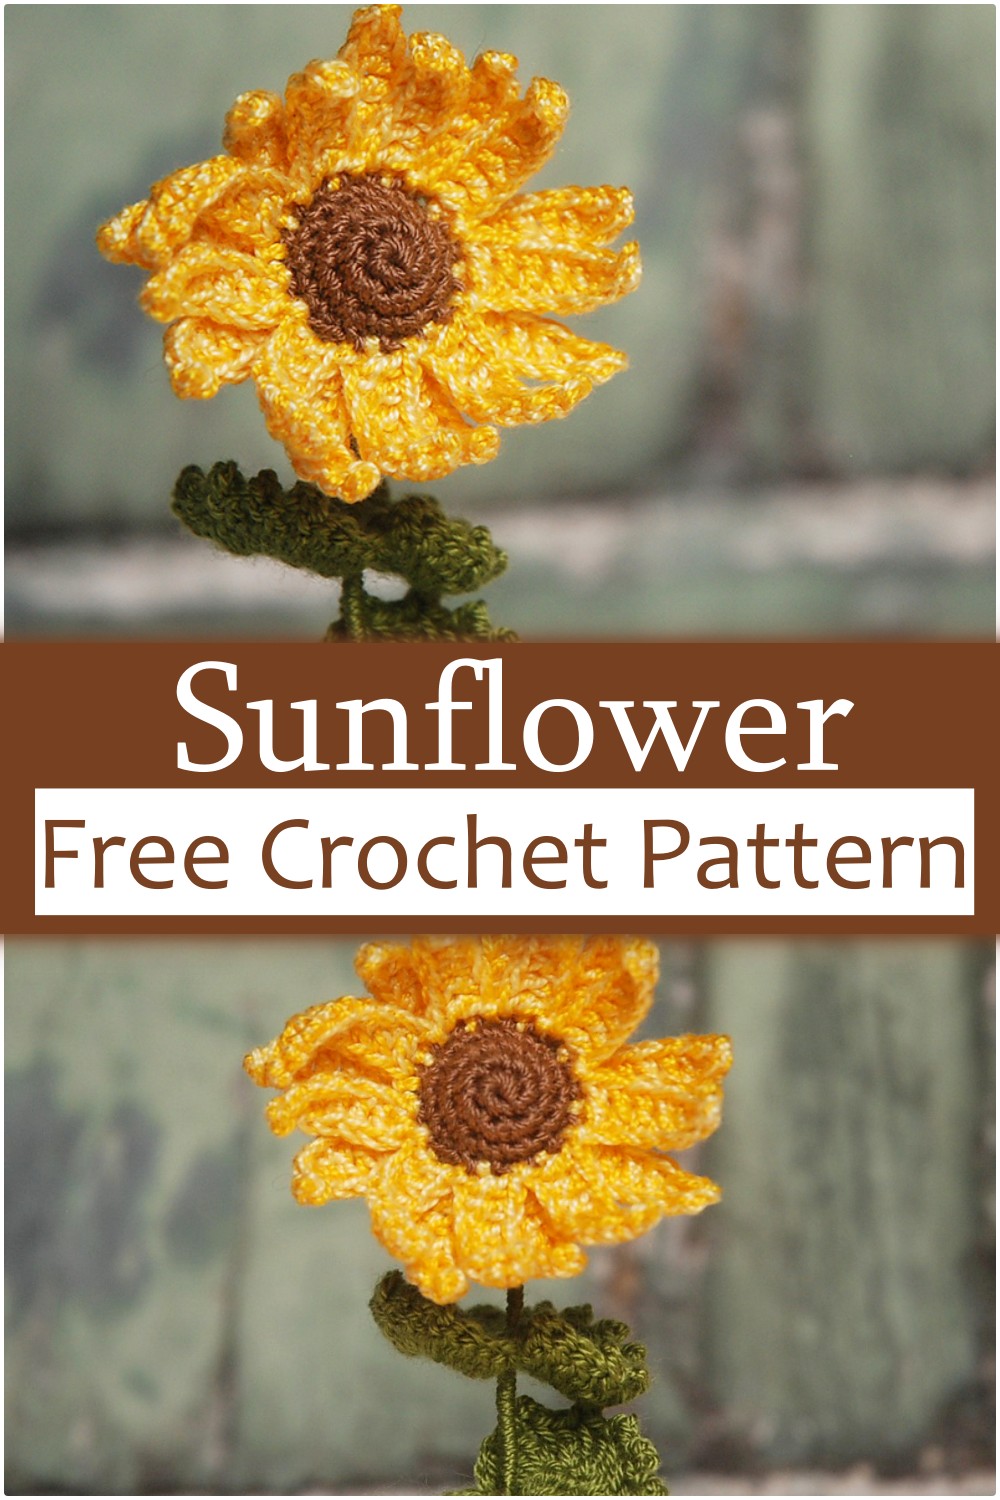 Crochet Sunflower Pattern With Leaves